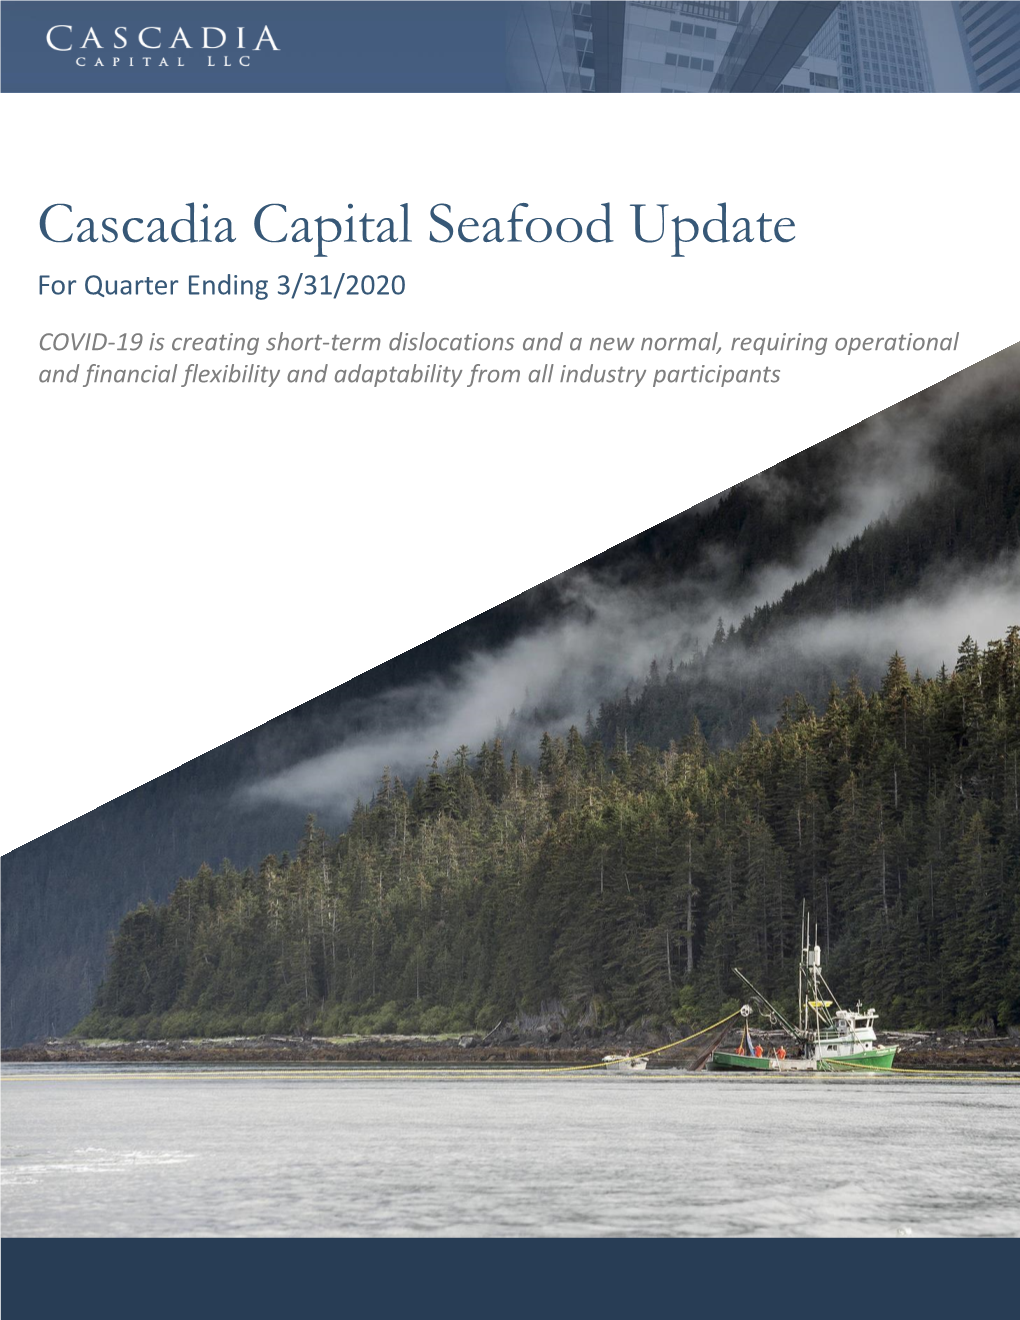 Cascadia Capital Seafood Update for Quarter Ending 3/31/2020